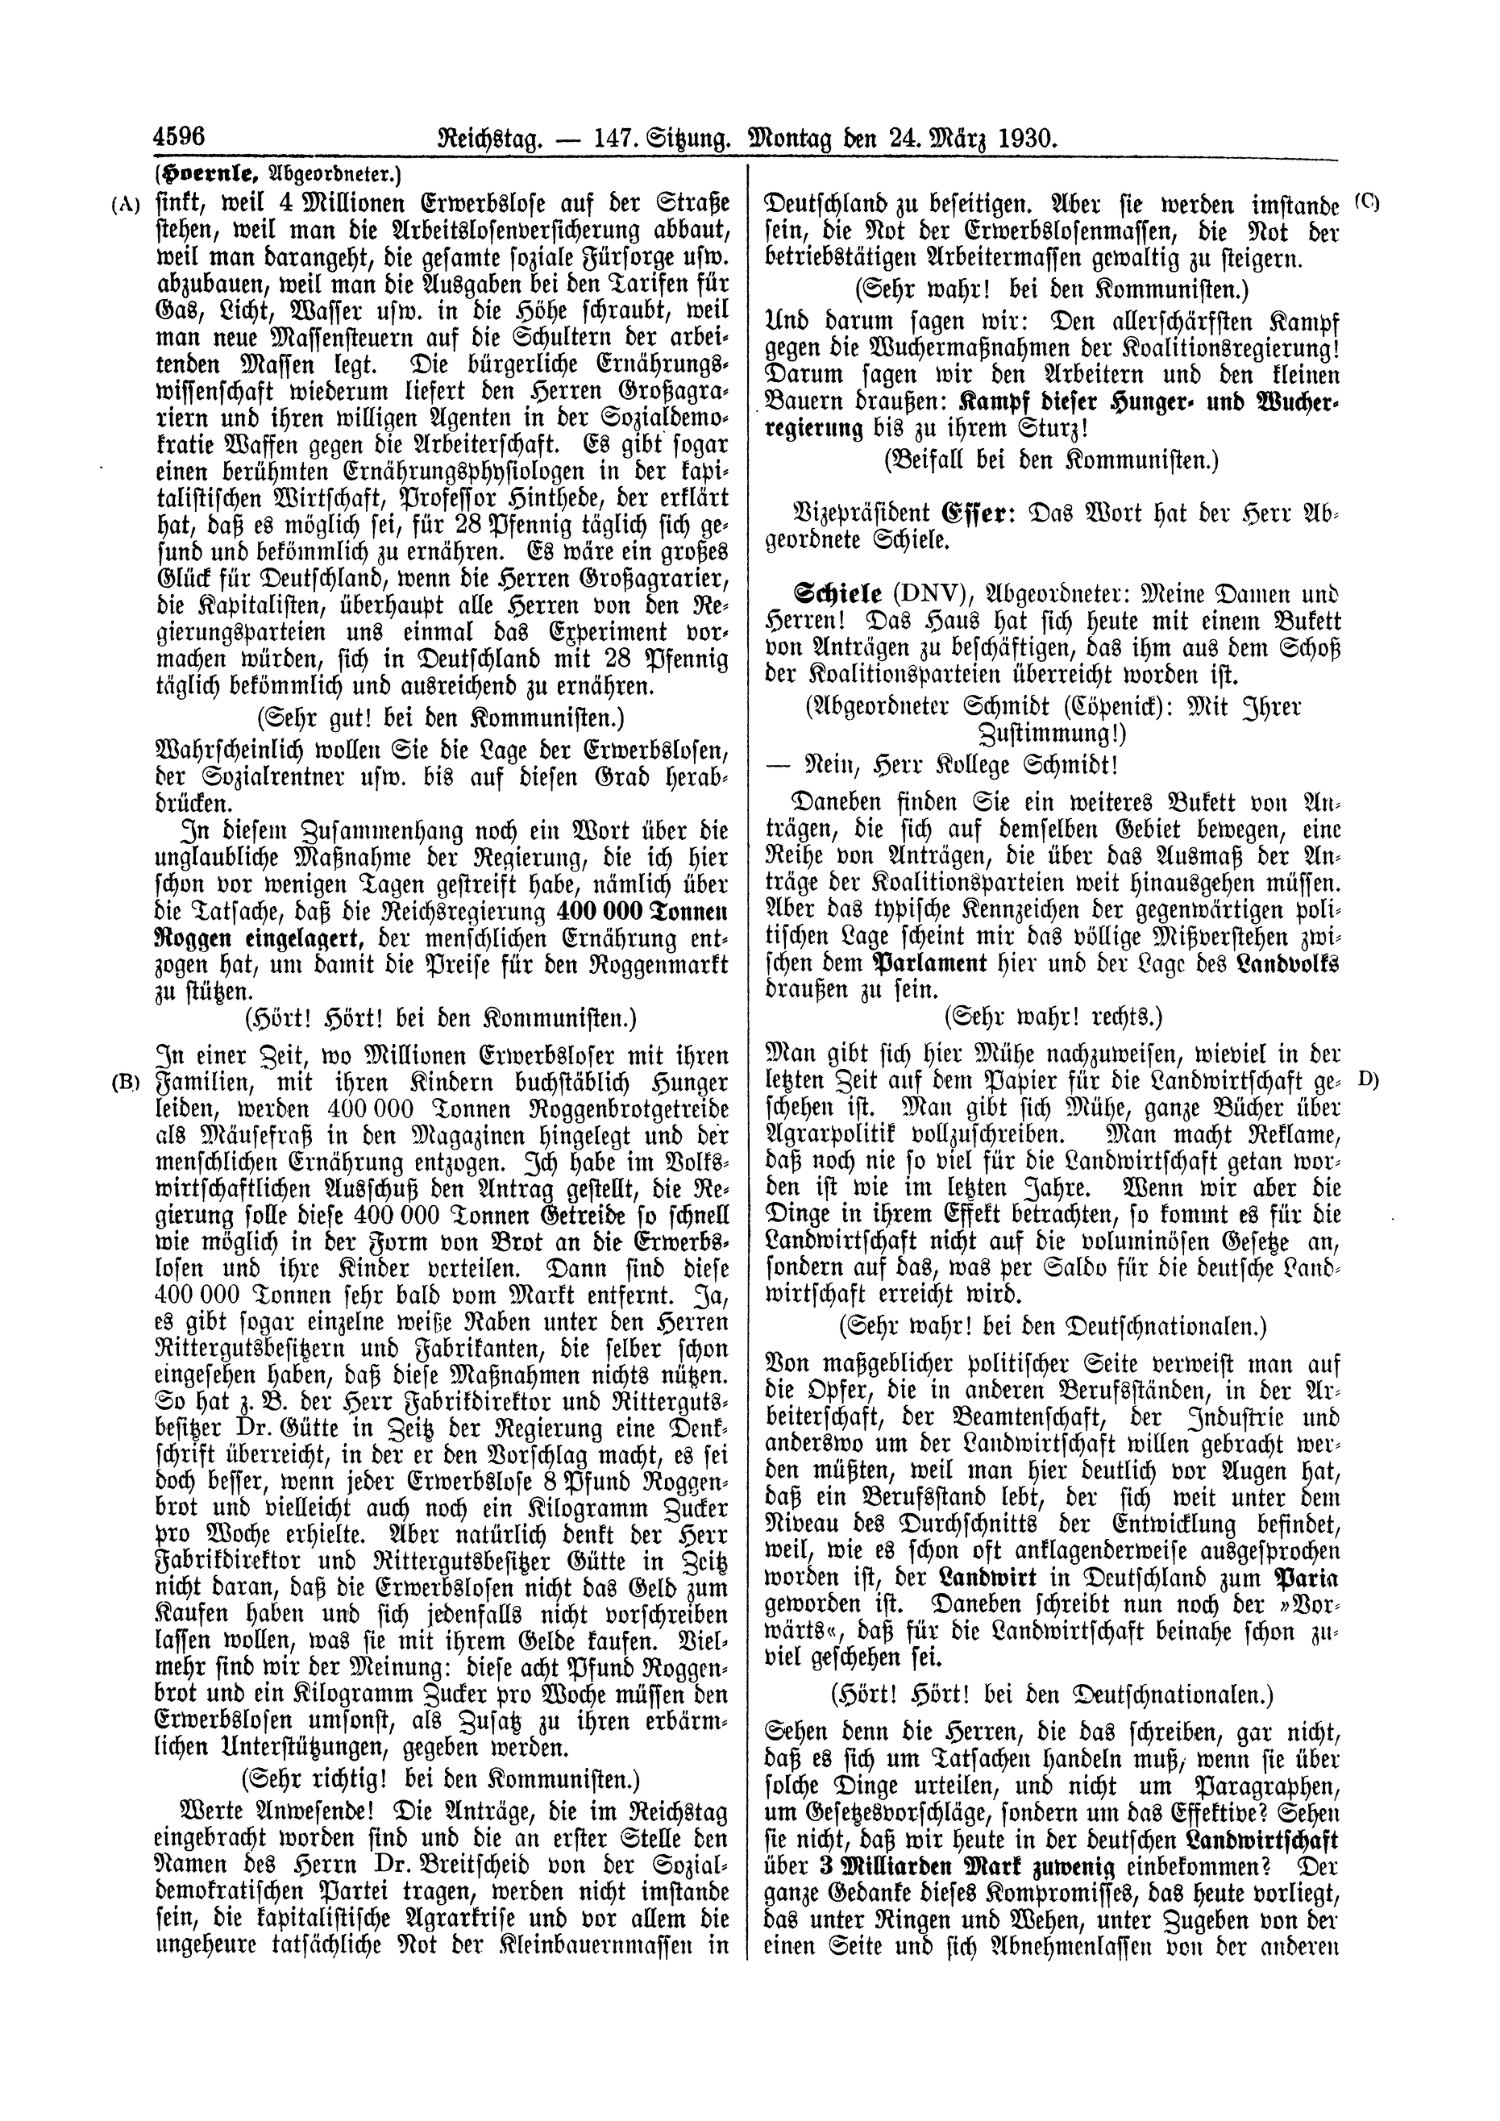 Scan of page 4596